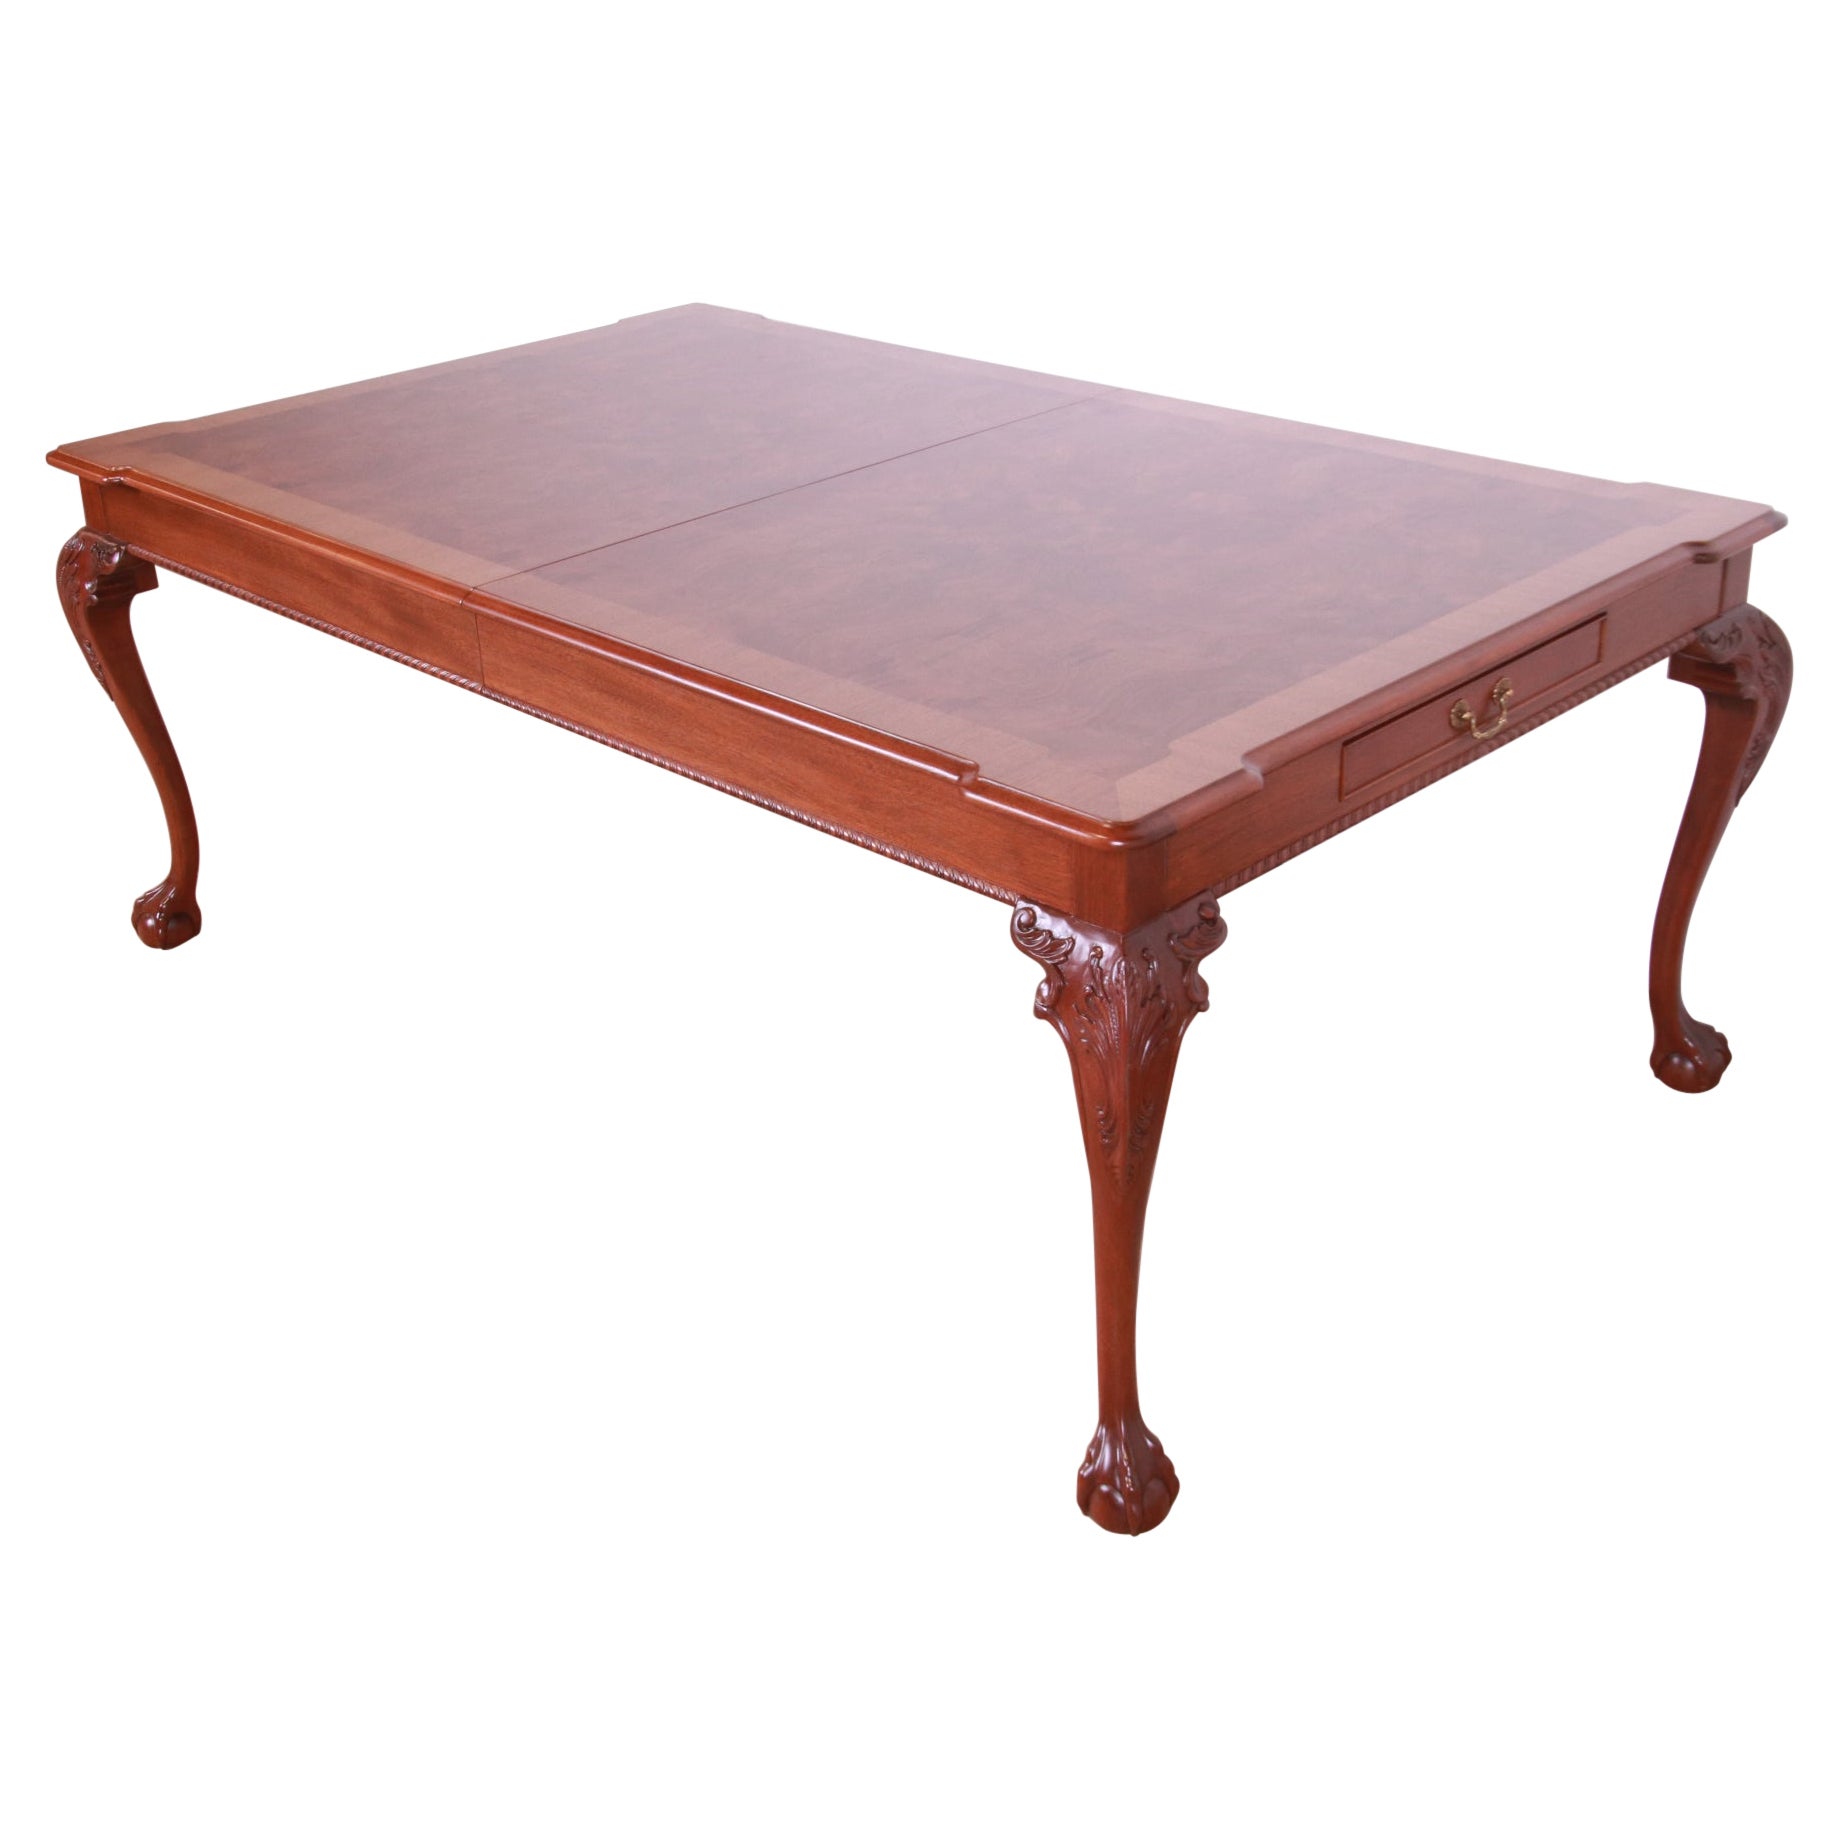 Henredon Chippendale Mahogany and Burl Wood Extension Dining Table, Refinished